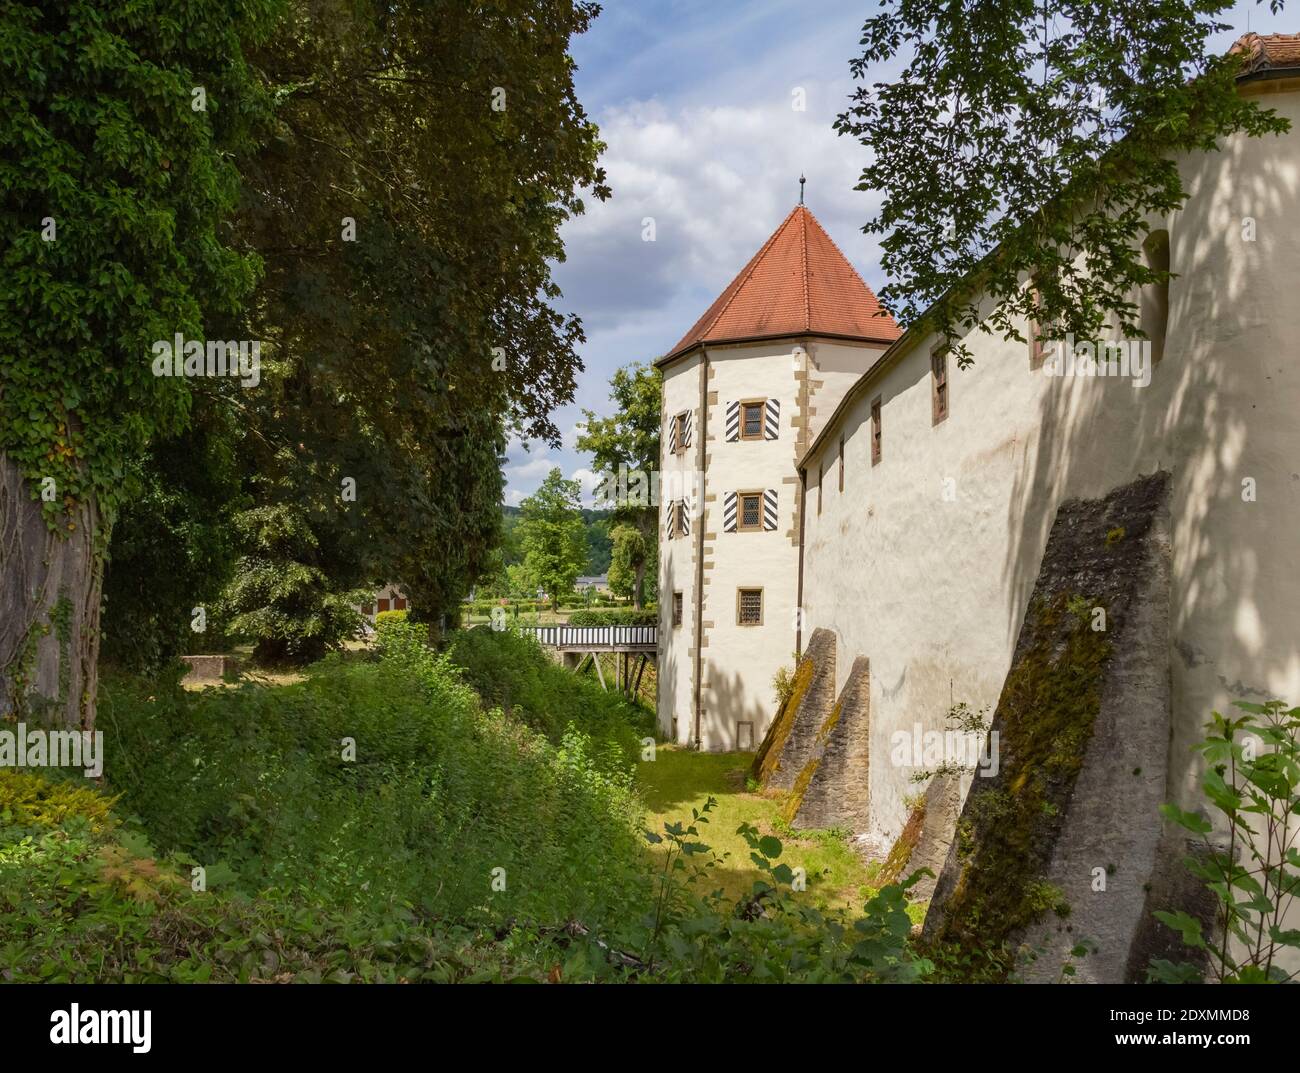 scenery around Jagsthausen castle located in Southern Germany at summer time Stock Photo